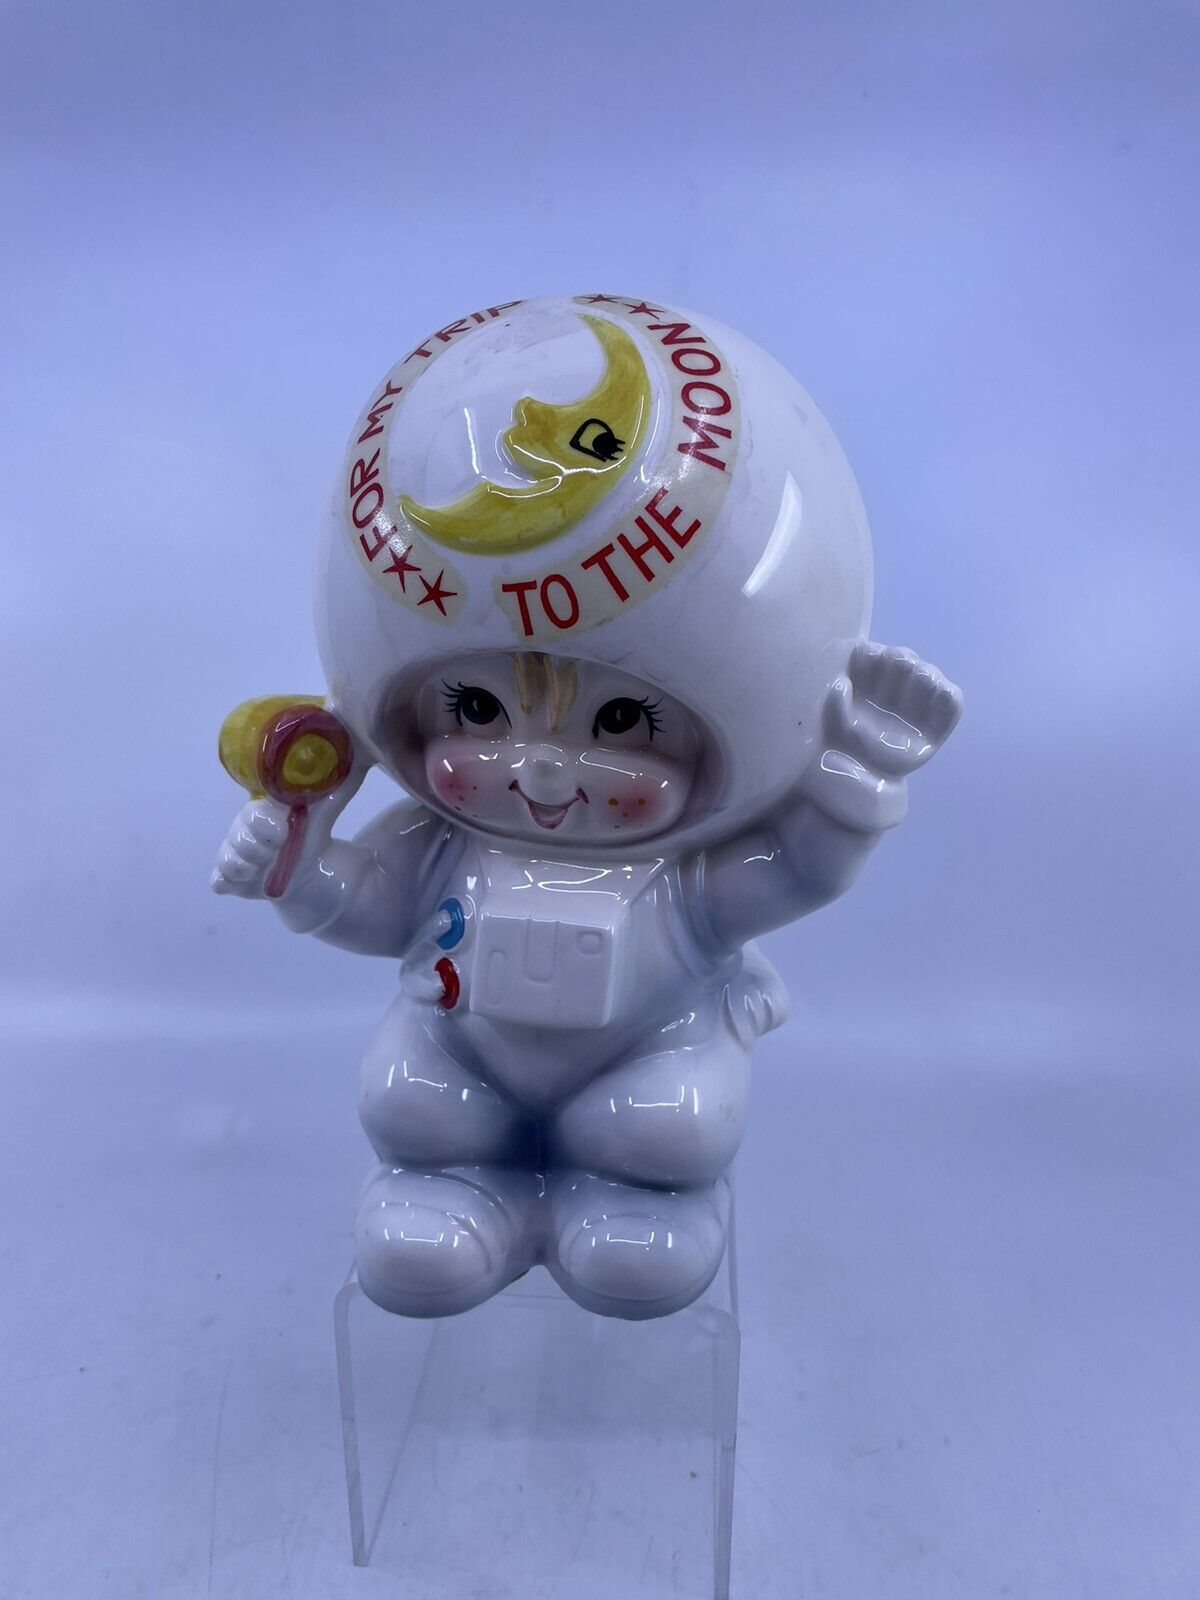 Vintage Lefton Japan Astronaut Ceramic Still Coin Bank For My Trip To The Moon